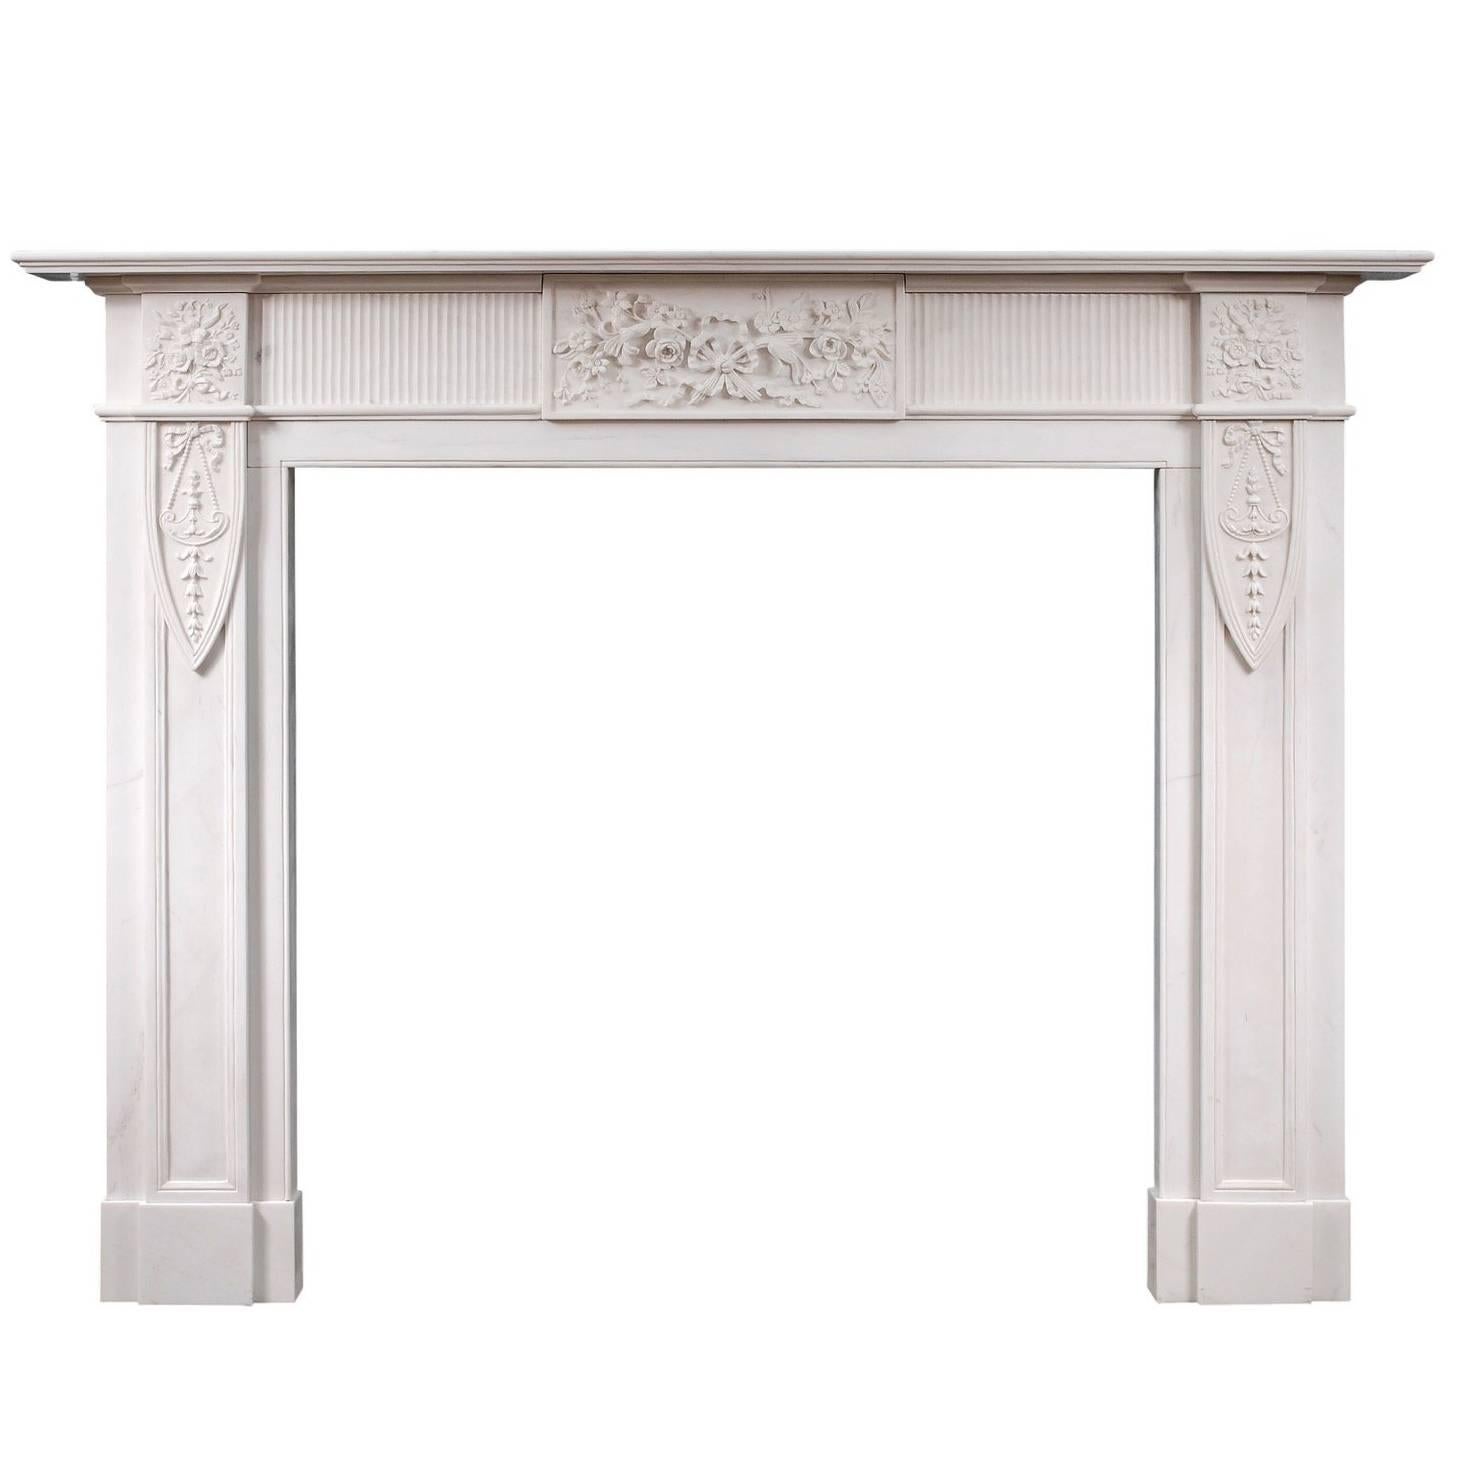 English Marble Fireplace in the Georgian Style